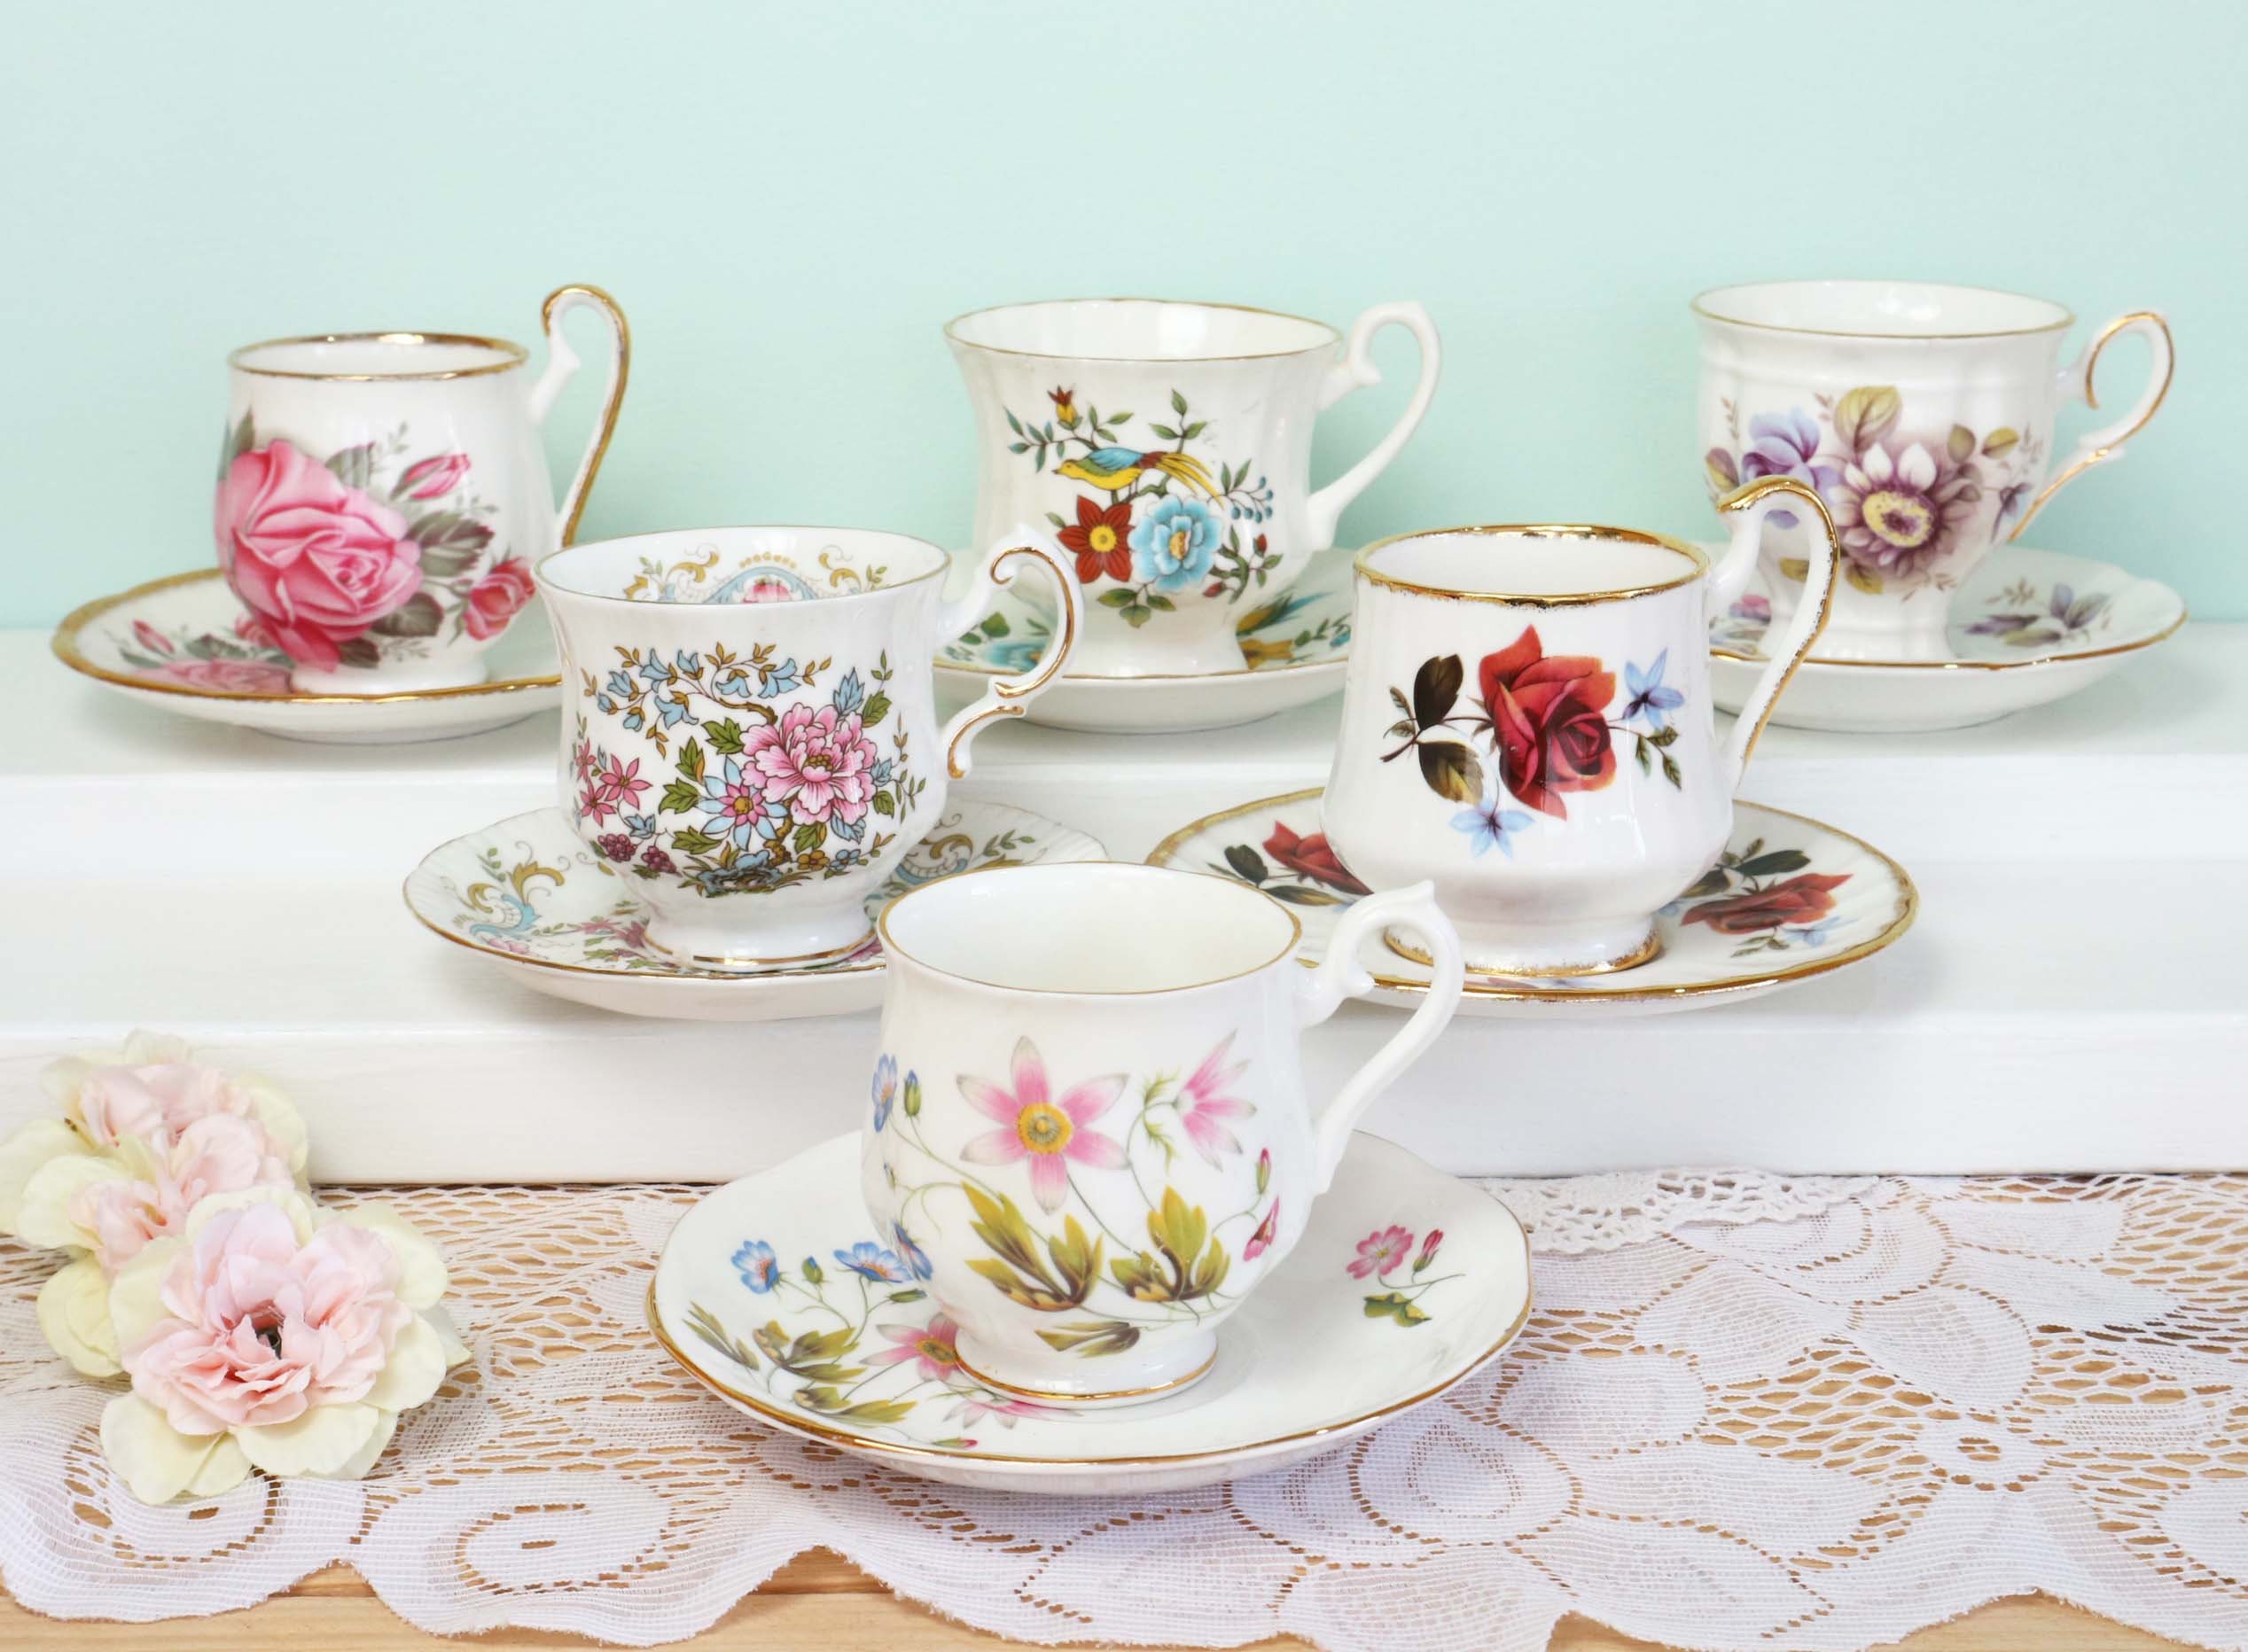 10 Demitasse Tea Cups and Saucers small Tea Cups, Teacups and Saucers Sets  Bulk, Demitasse Cups and Saucers 